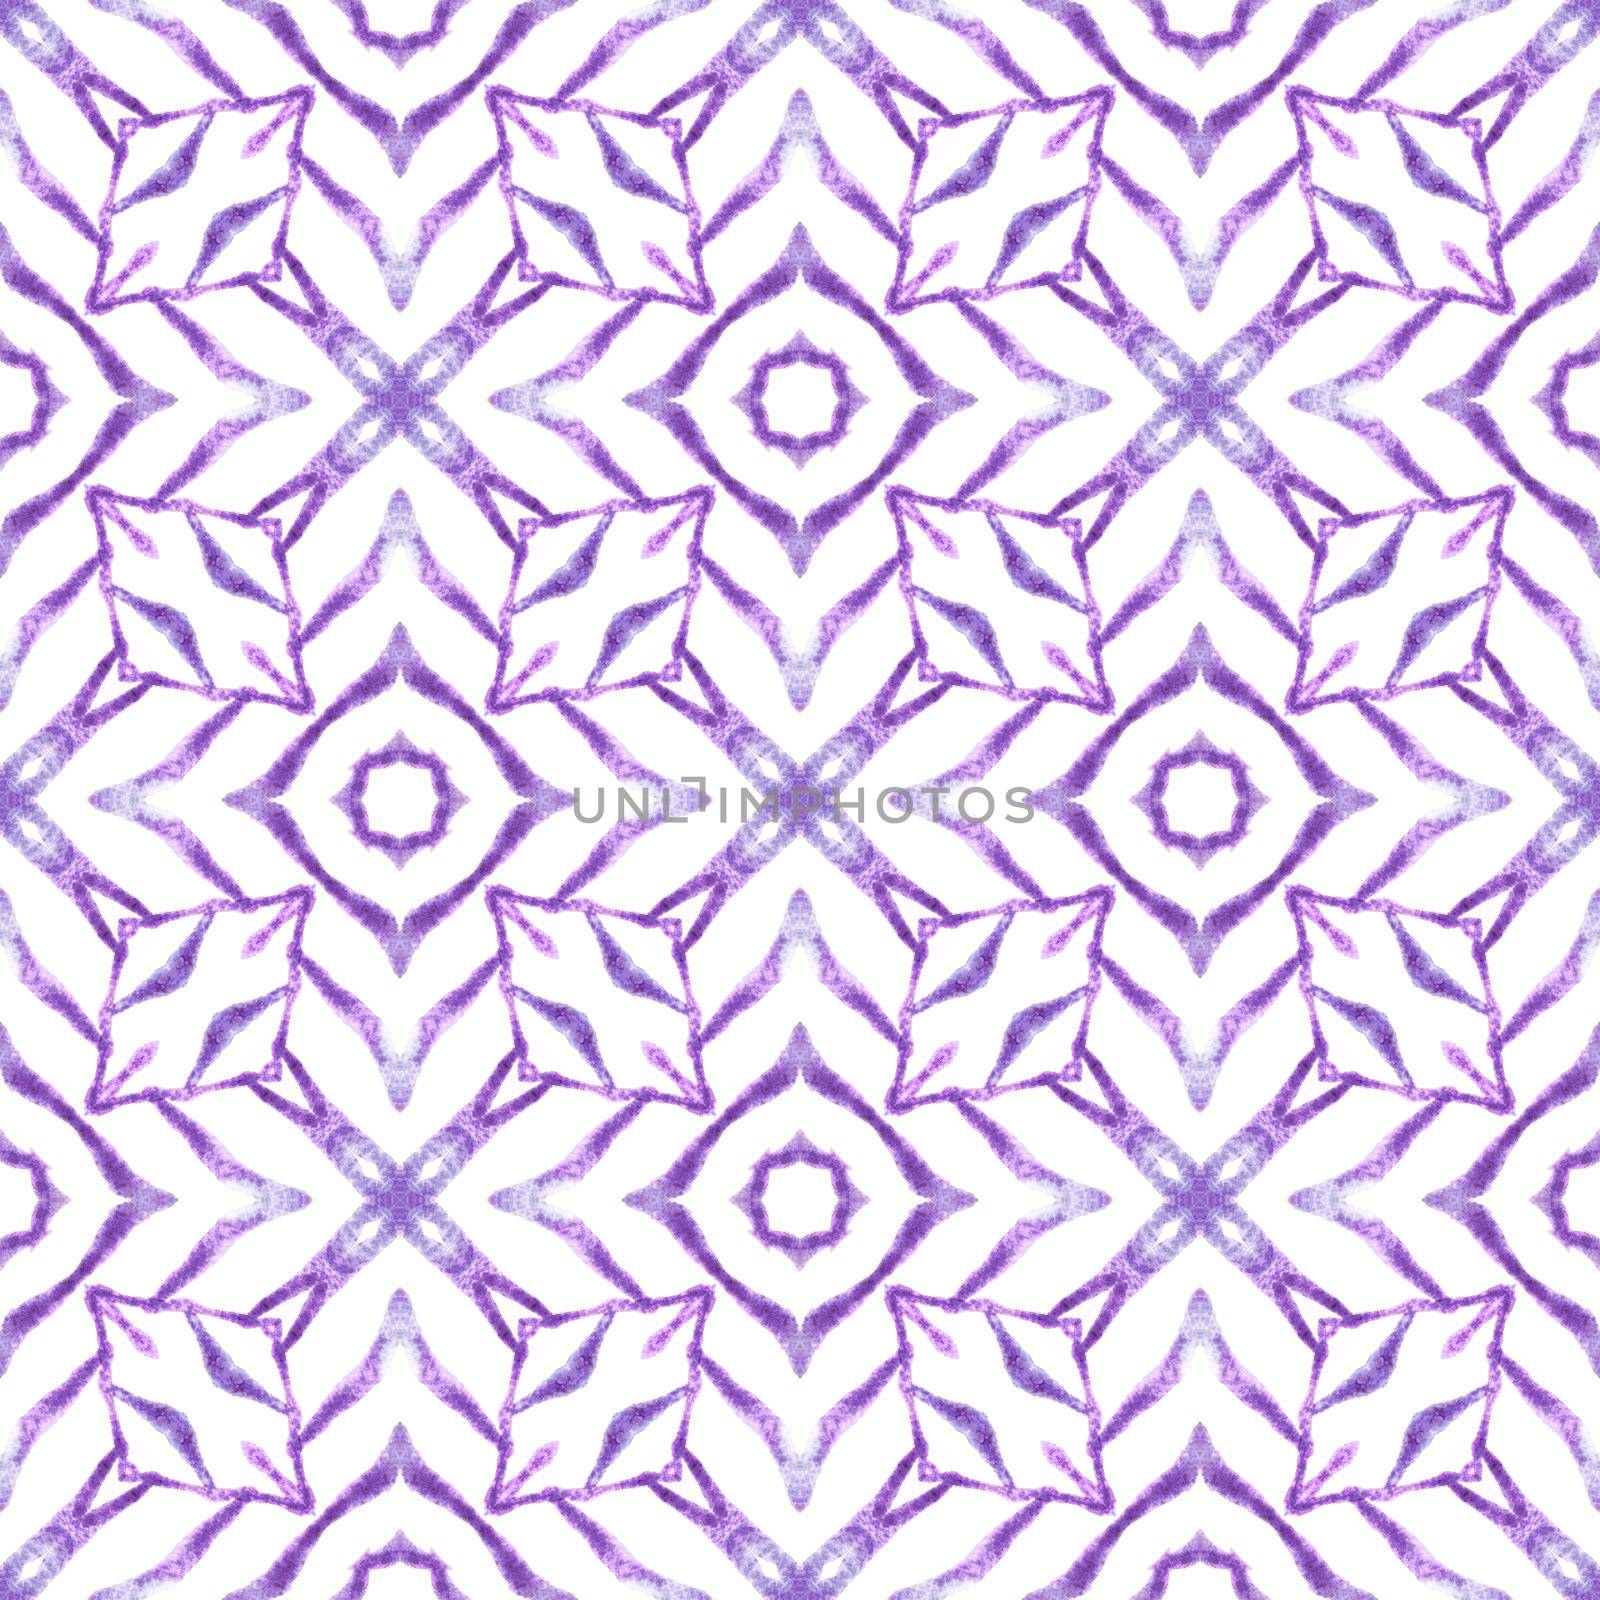 Watercolor summer ethnic border pattern. Purple precious boho chic summer design. Textile ready magnificent print, swimwear fabric, wallpaper, wrapping. Ethnic hand painted pattern.